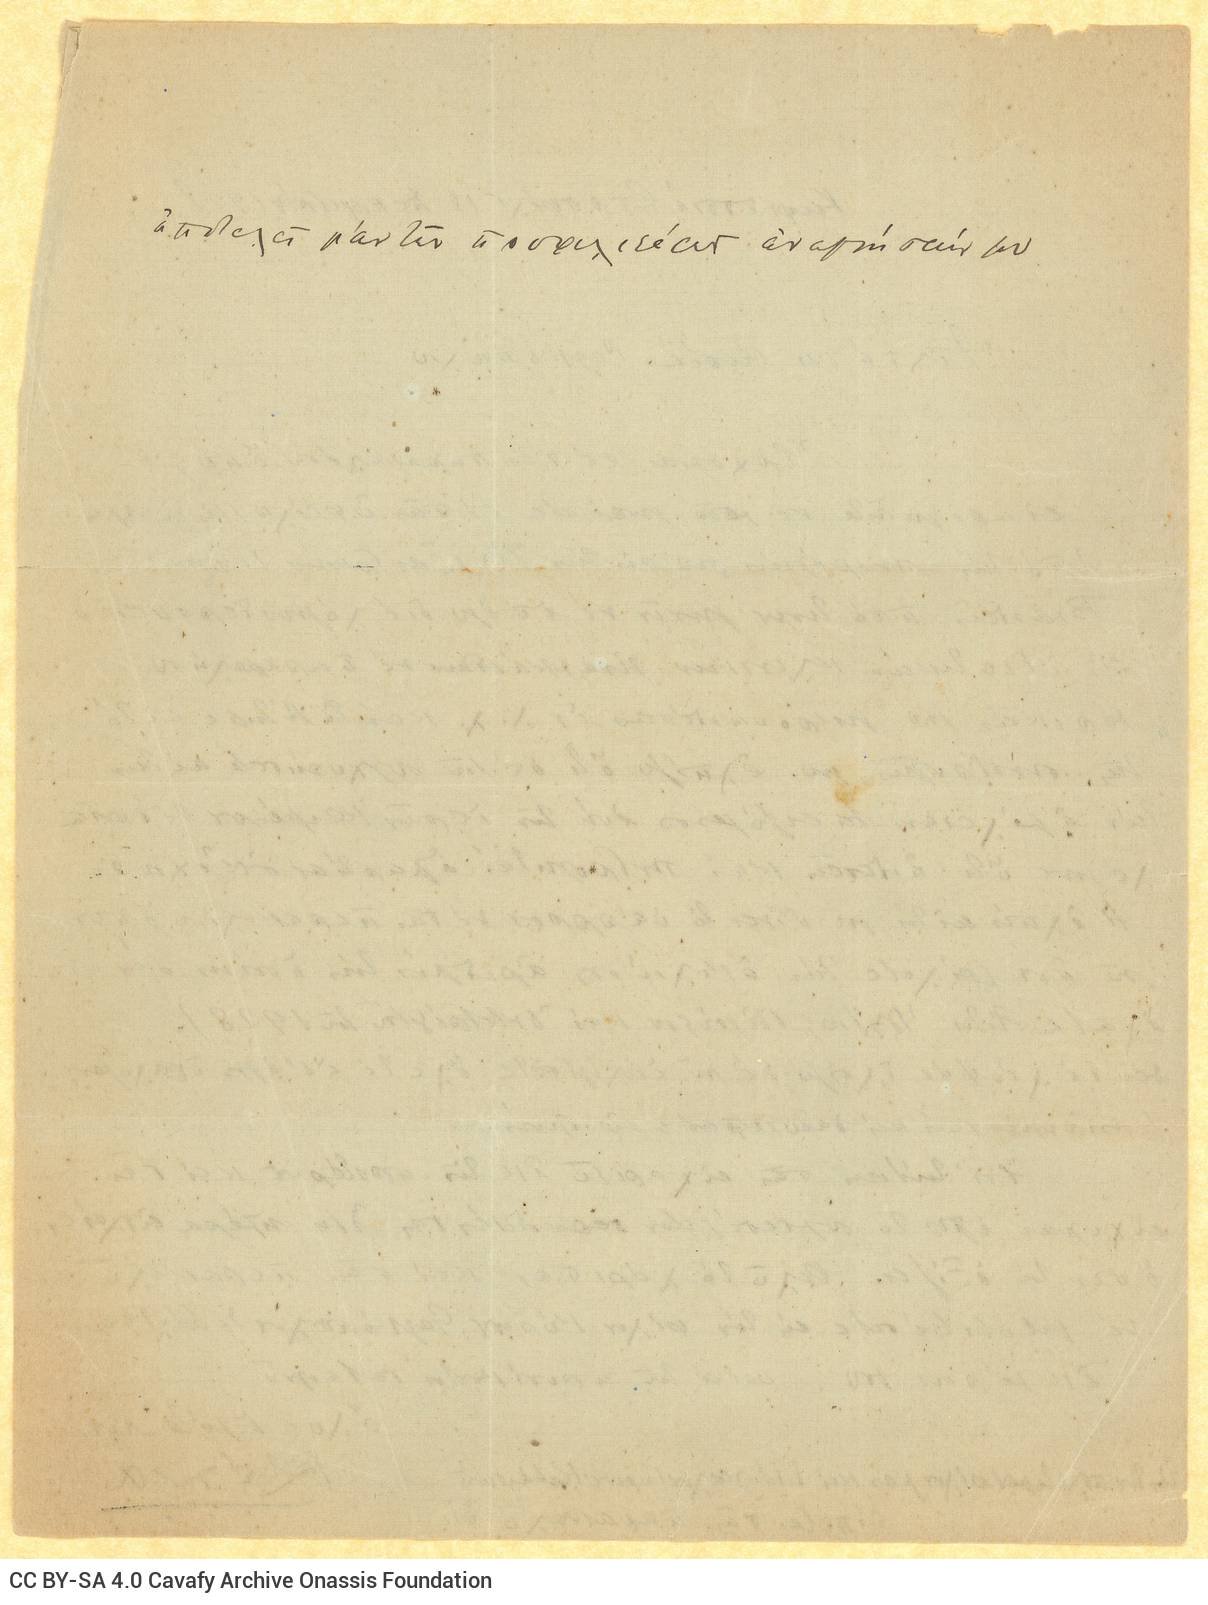 Handwritten letter by Konstantinos Delta to Rica Singopoulo on both sides of a ruled sheet. Delta wishes to renew his subscri